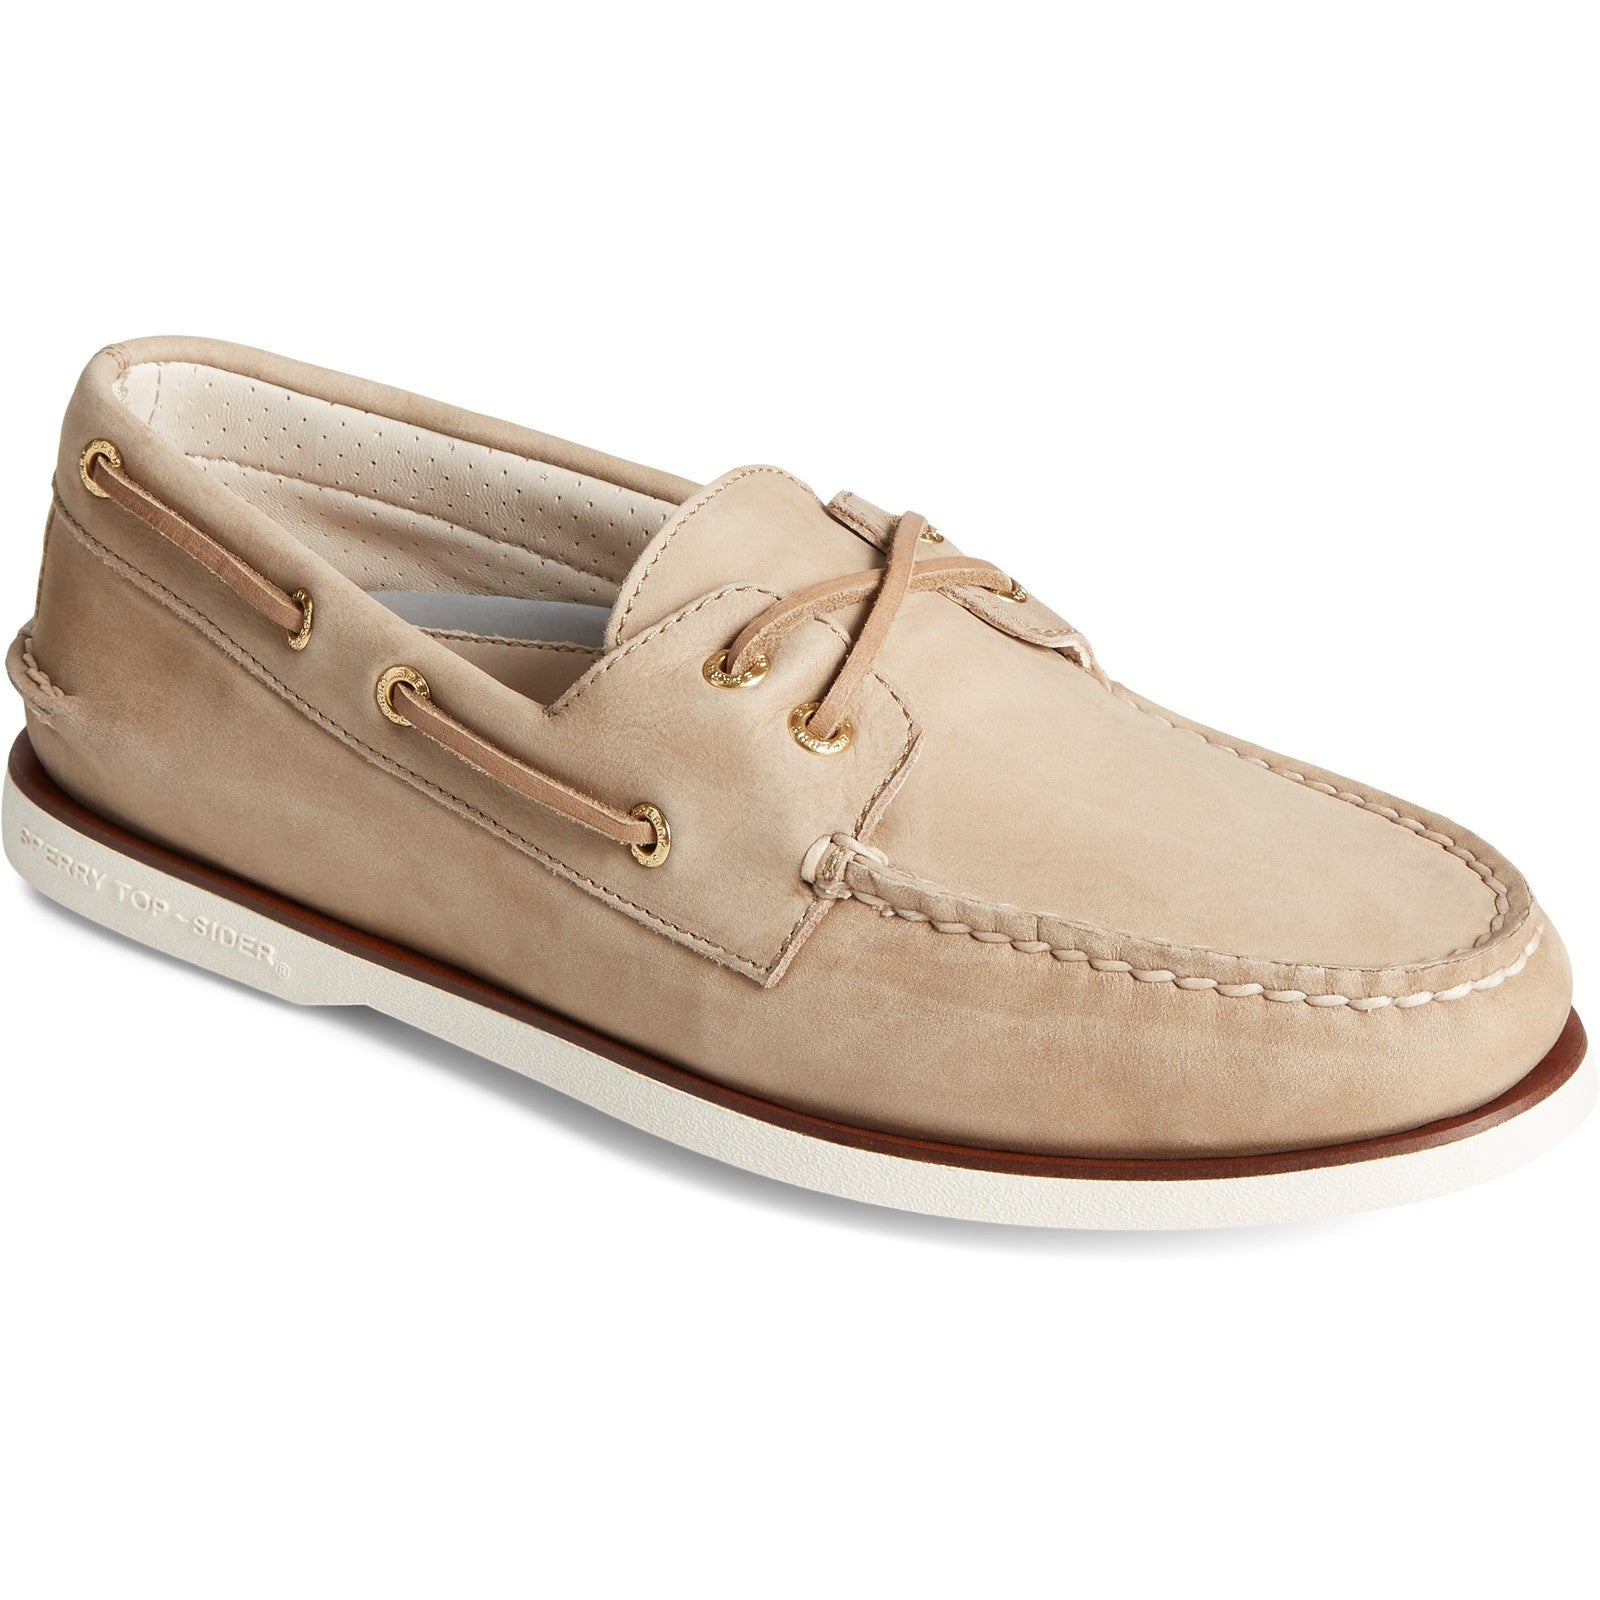 Sperry Mens A/O 2-Eye Boat Shoes - Cream